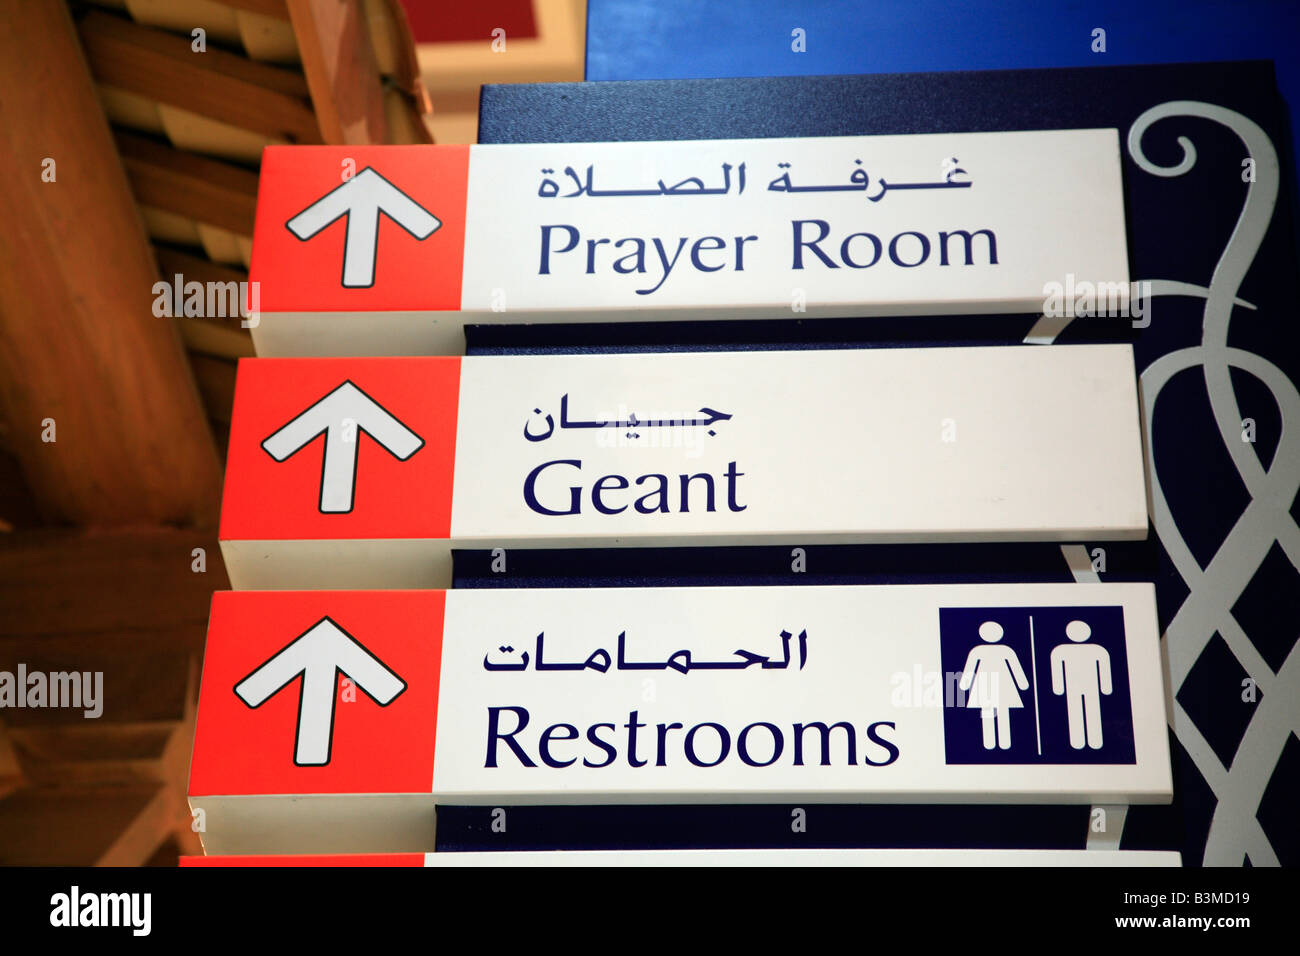 Sign for prayer room Geant supermarket and restrooms in the Ibn Battuta Mall Dubai Stock Photo